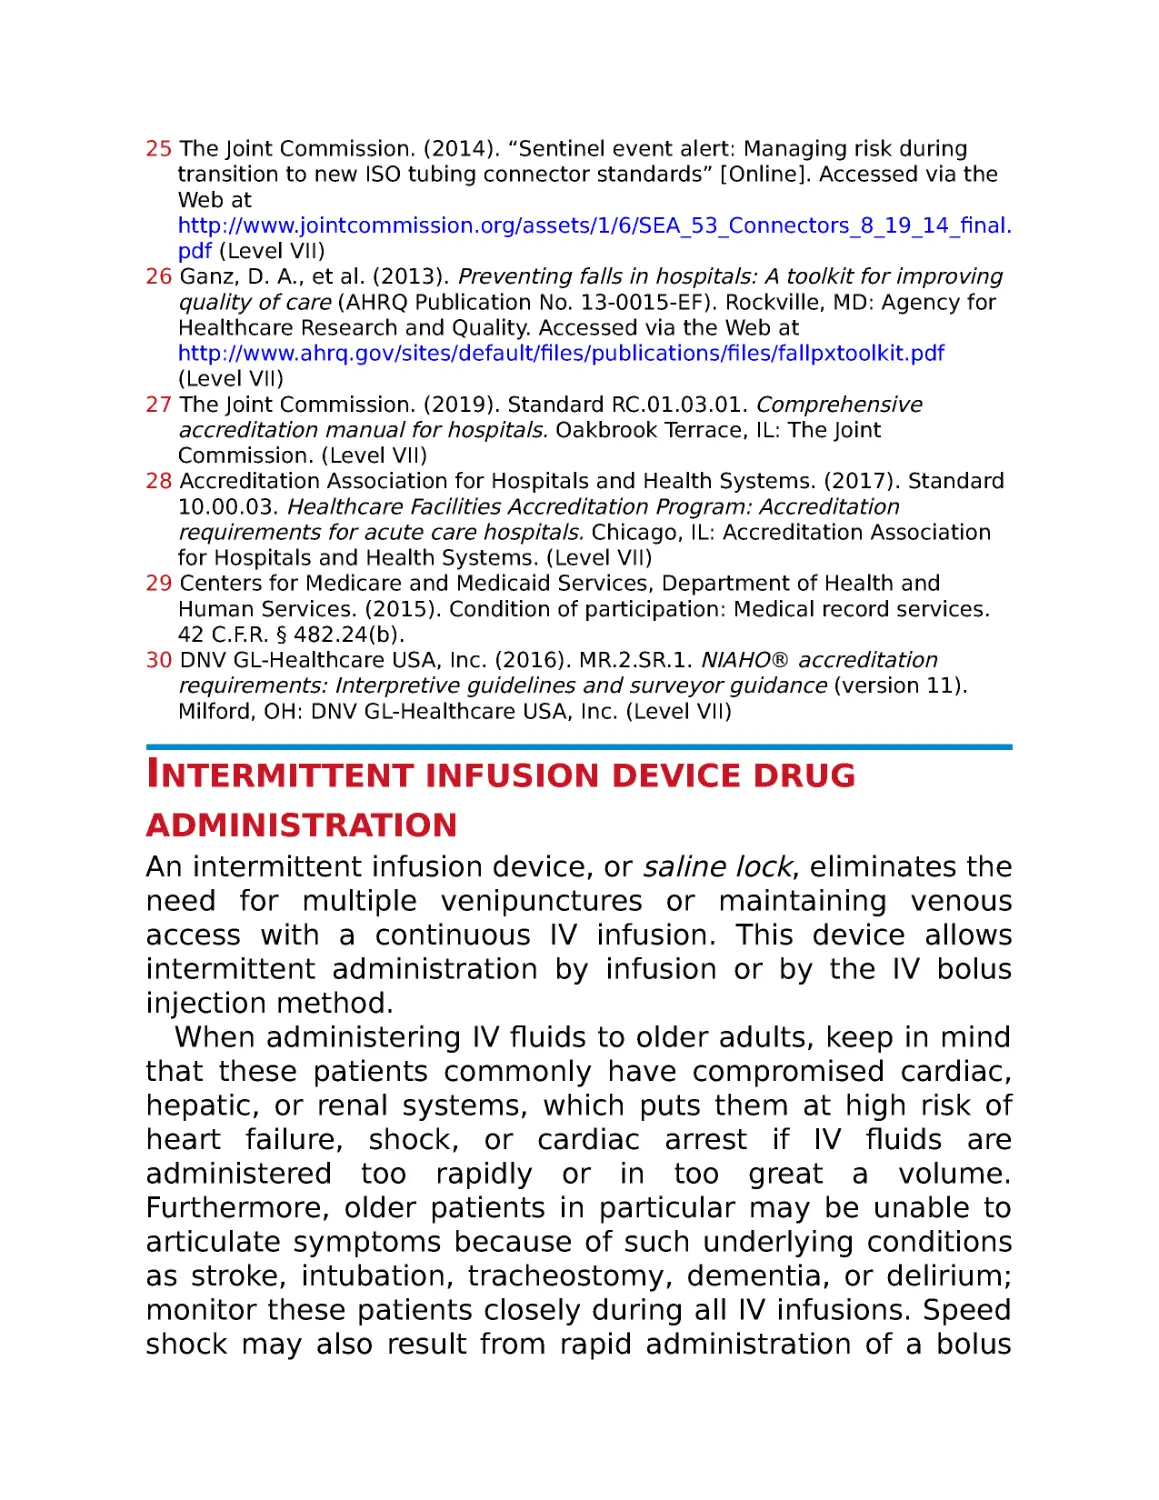 Intermittent infusion device drug administration